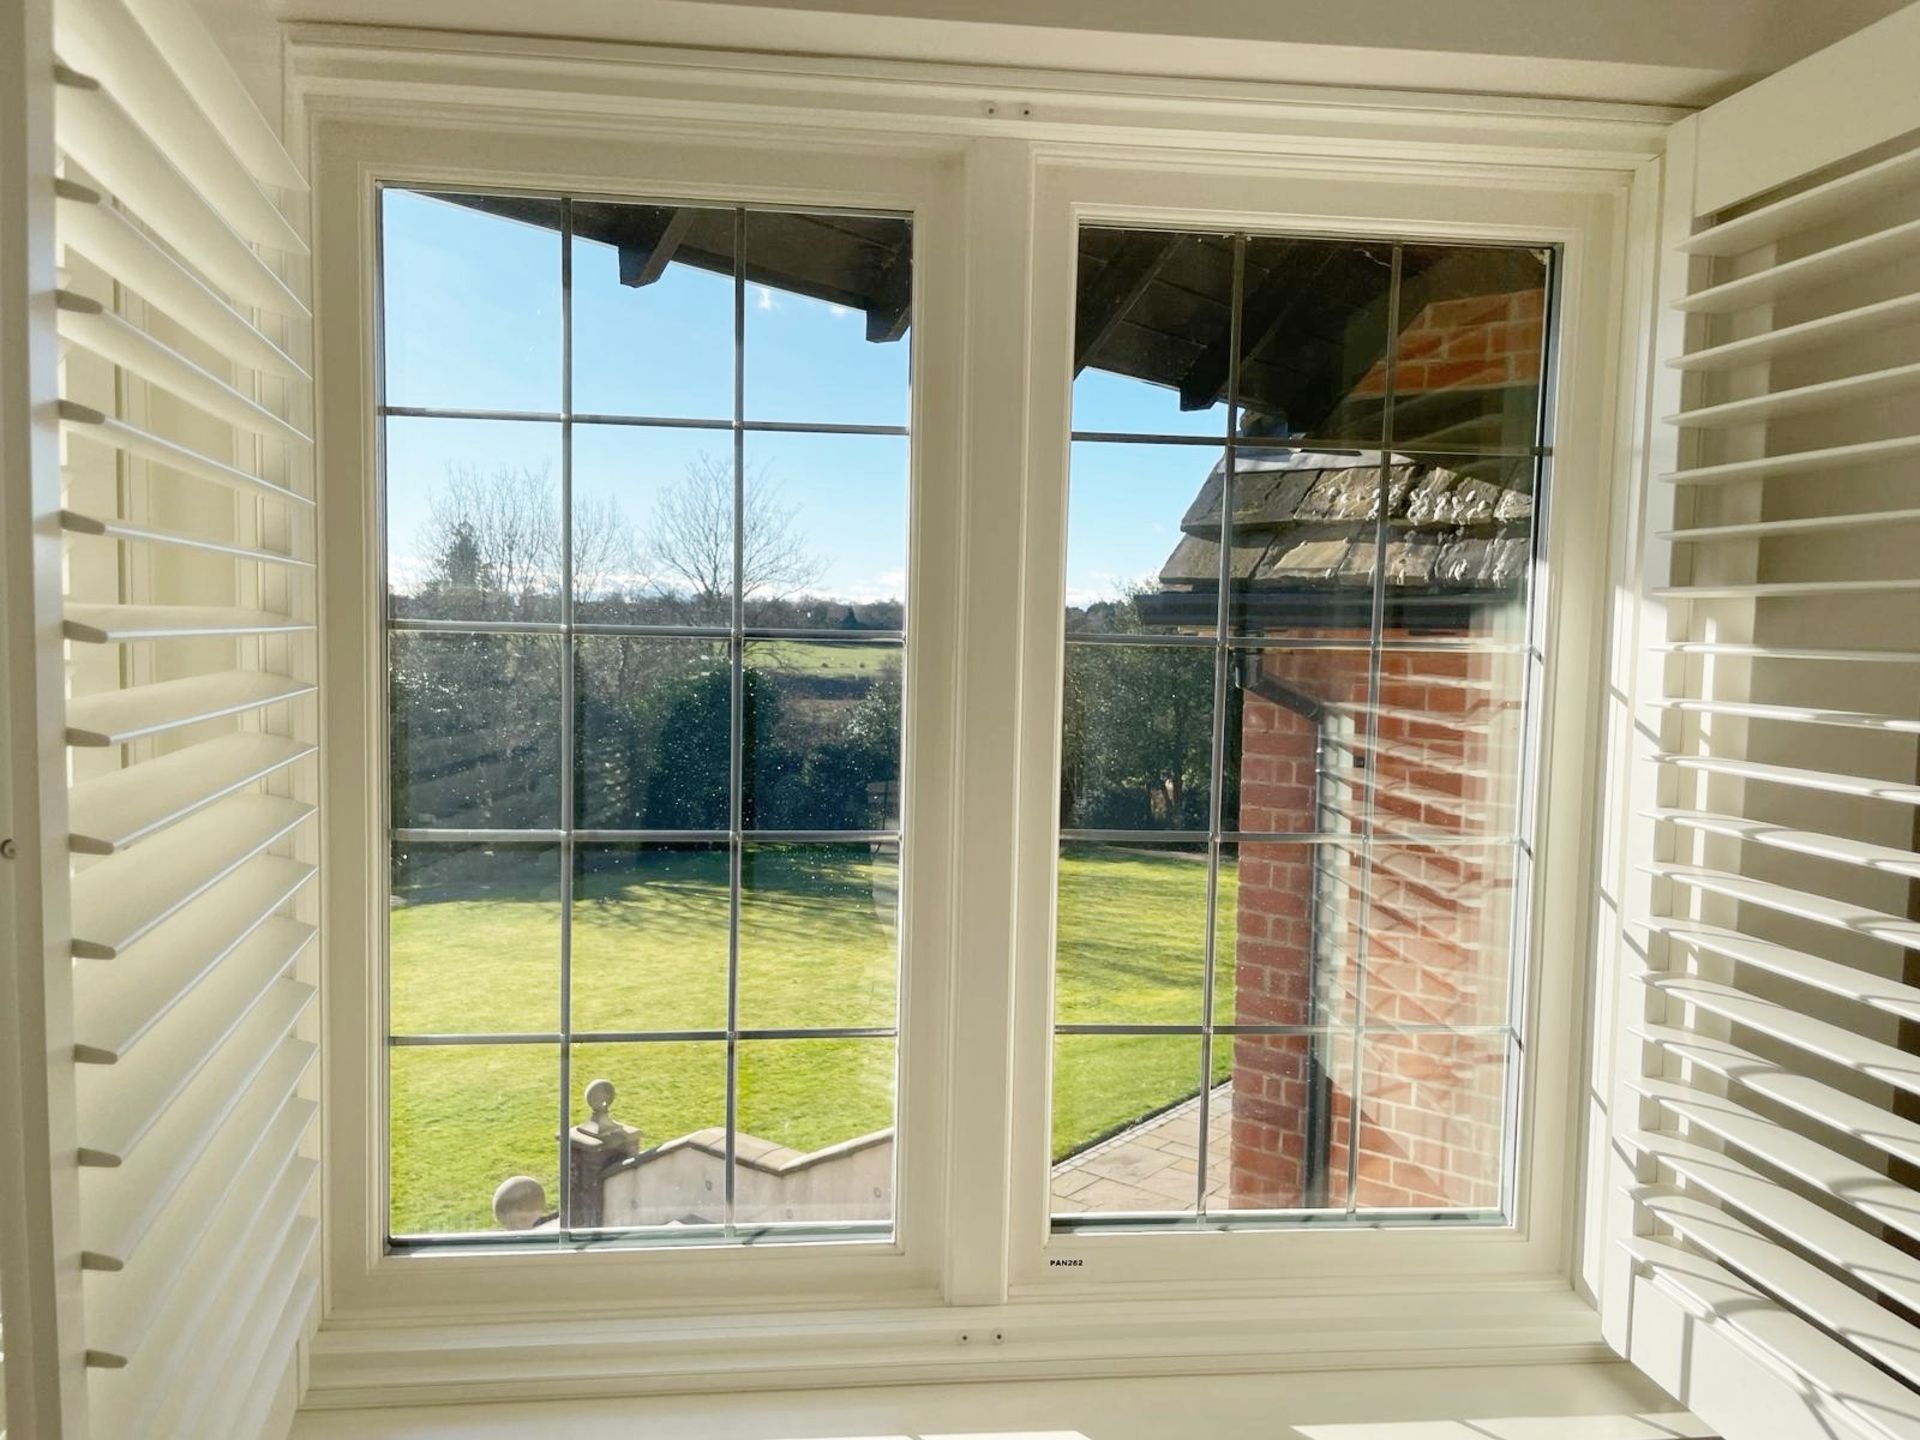 1 x Hardwood Timber Double Glazed Leaded 2-Pane Window Frame fitted with Shutter Blinds - Ref: - Image 2 of 12